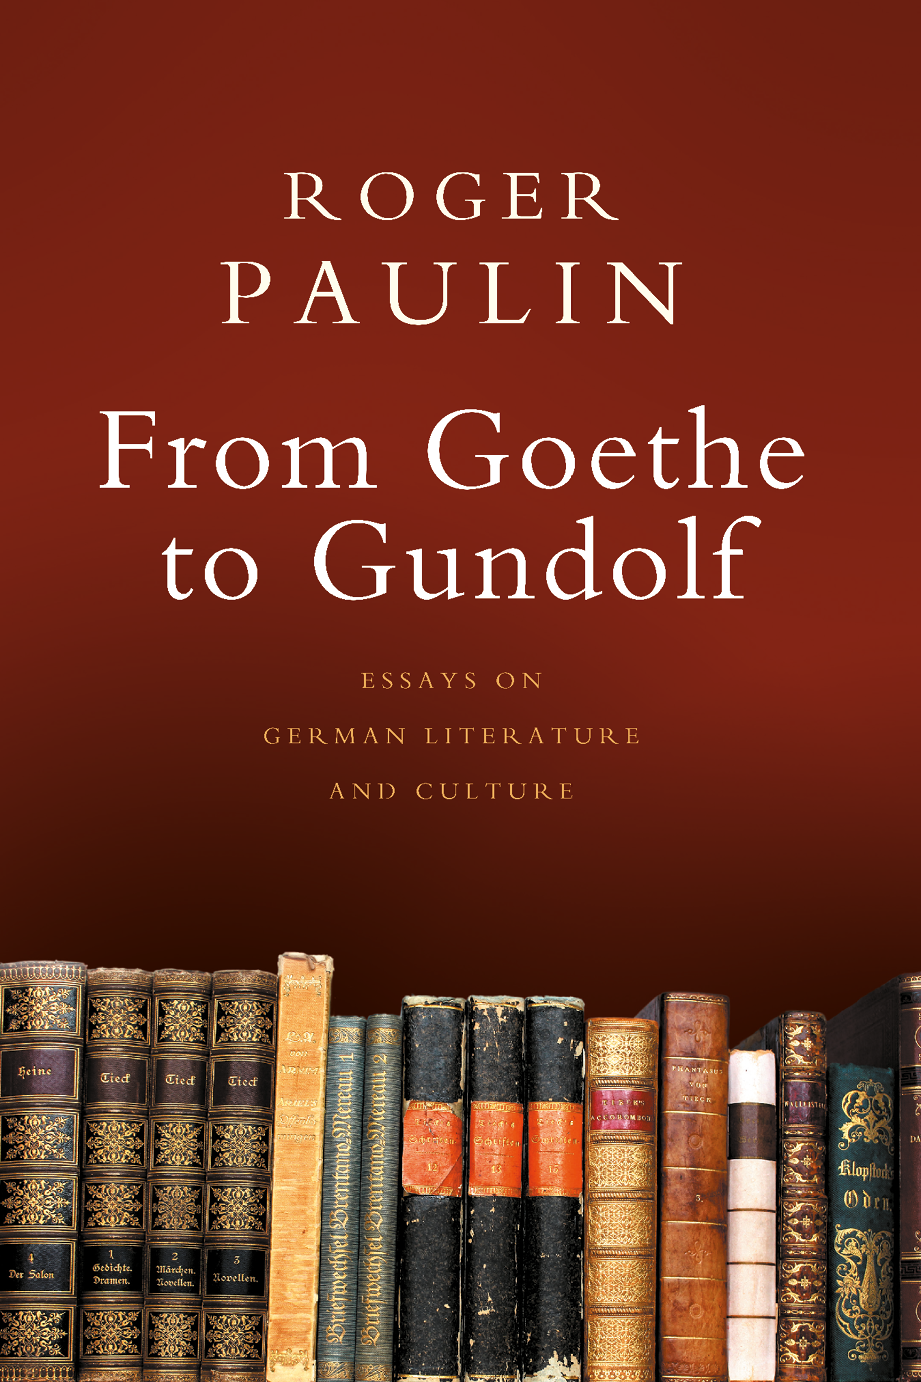 From Goethe to Gundolf book cover image